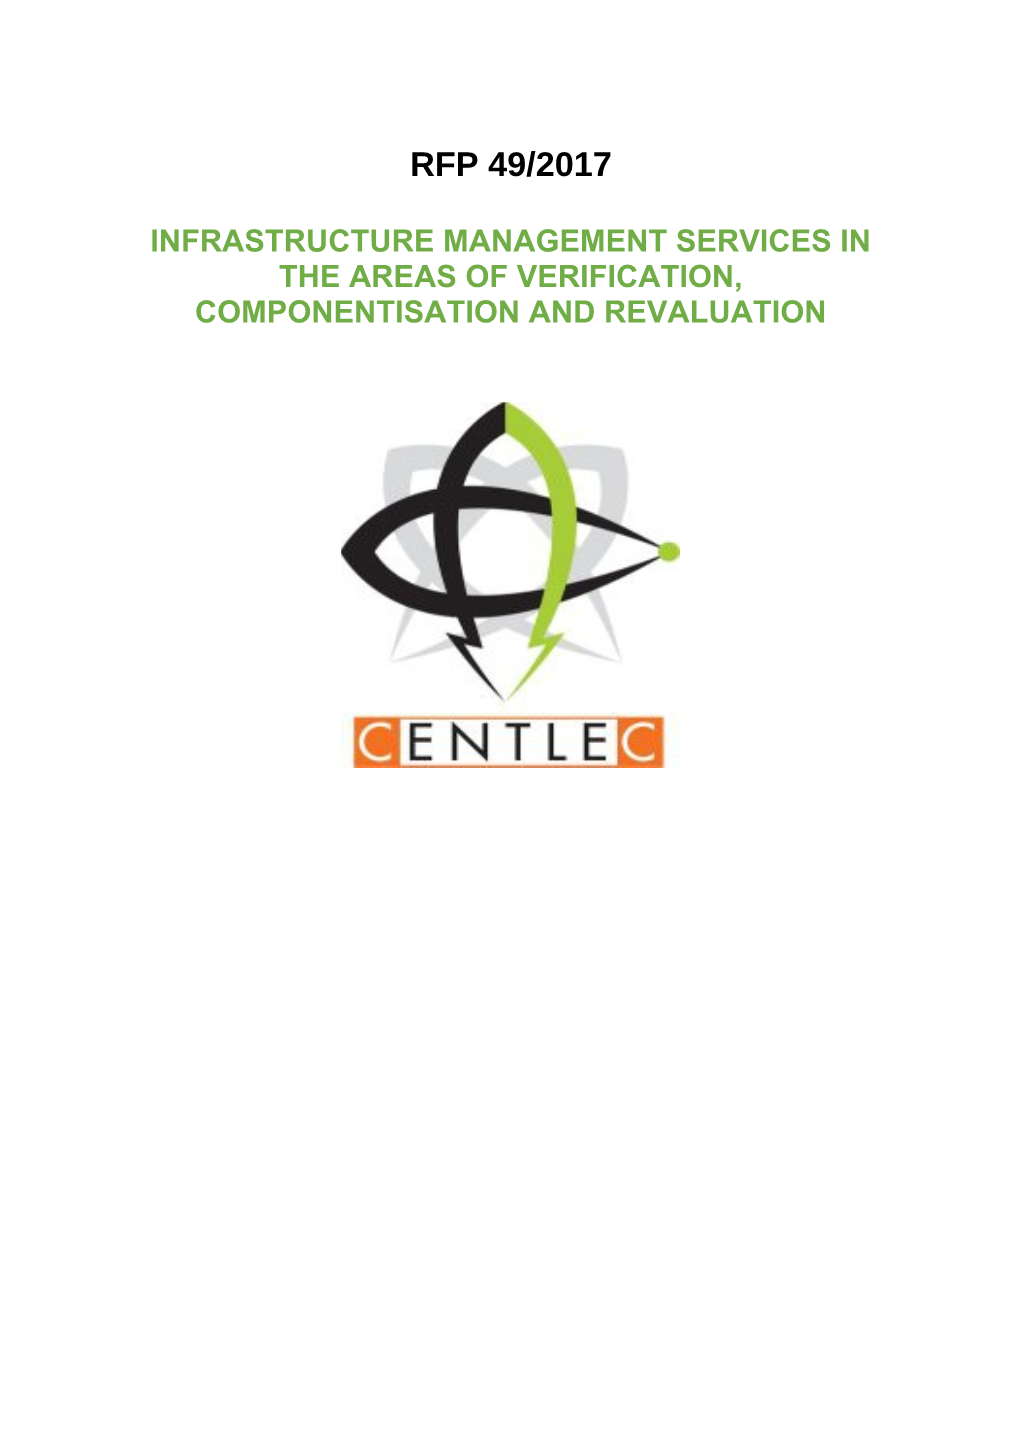 Infrastructure Management Services in the Areas of Verification, Componentisation And